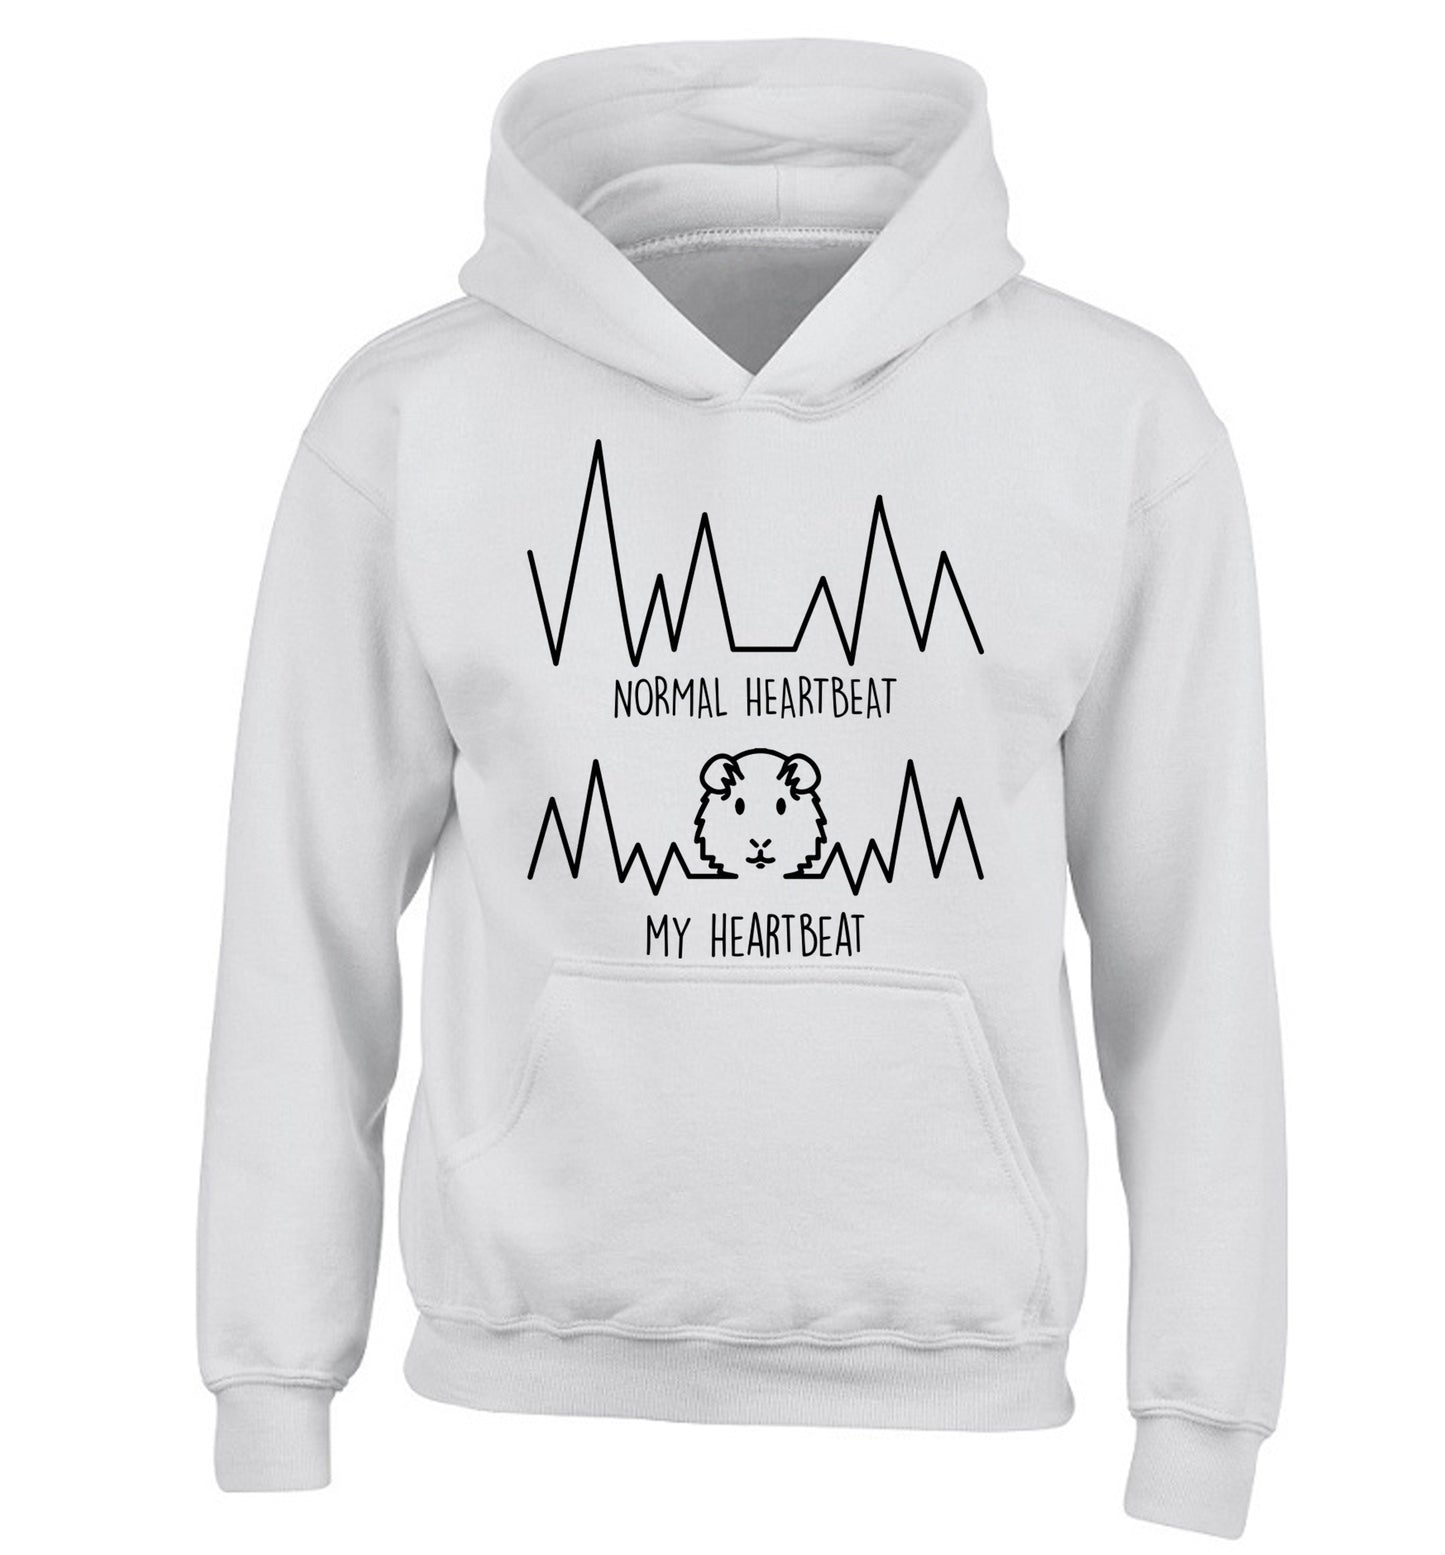 Normal heartbeat vs my heartbeat guinea pig lover children's white hoodie 12-14 Years